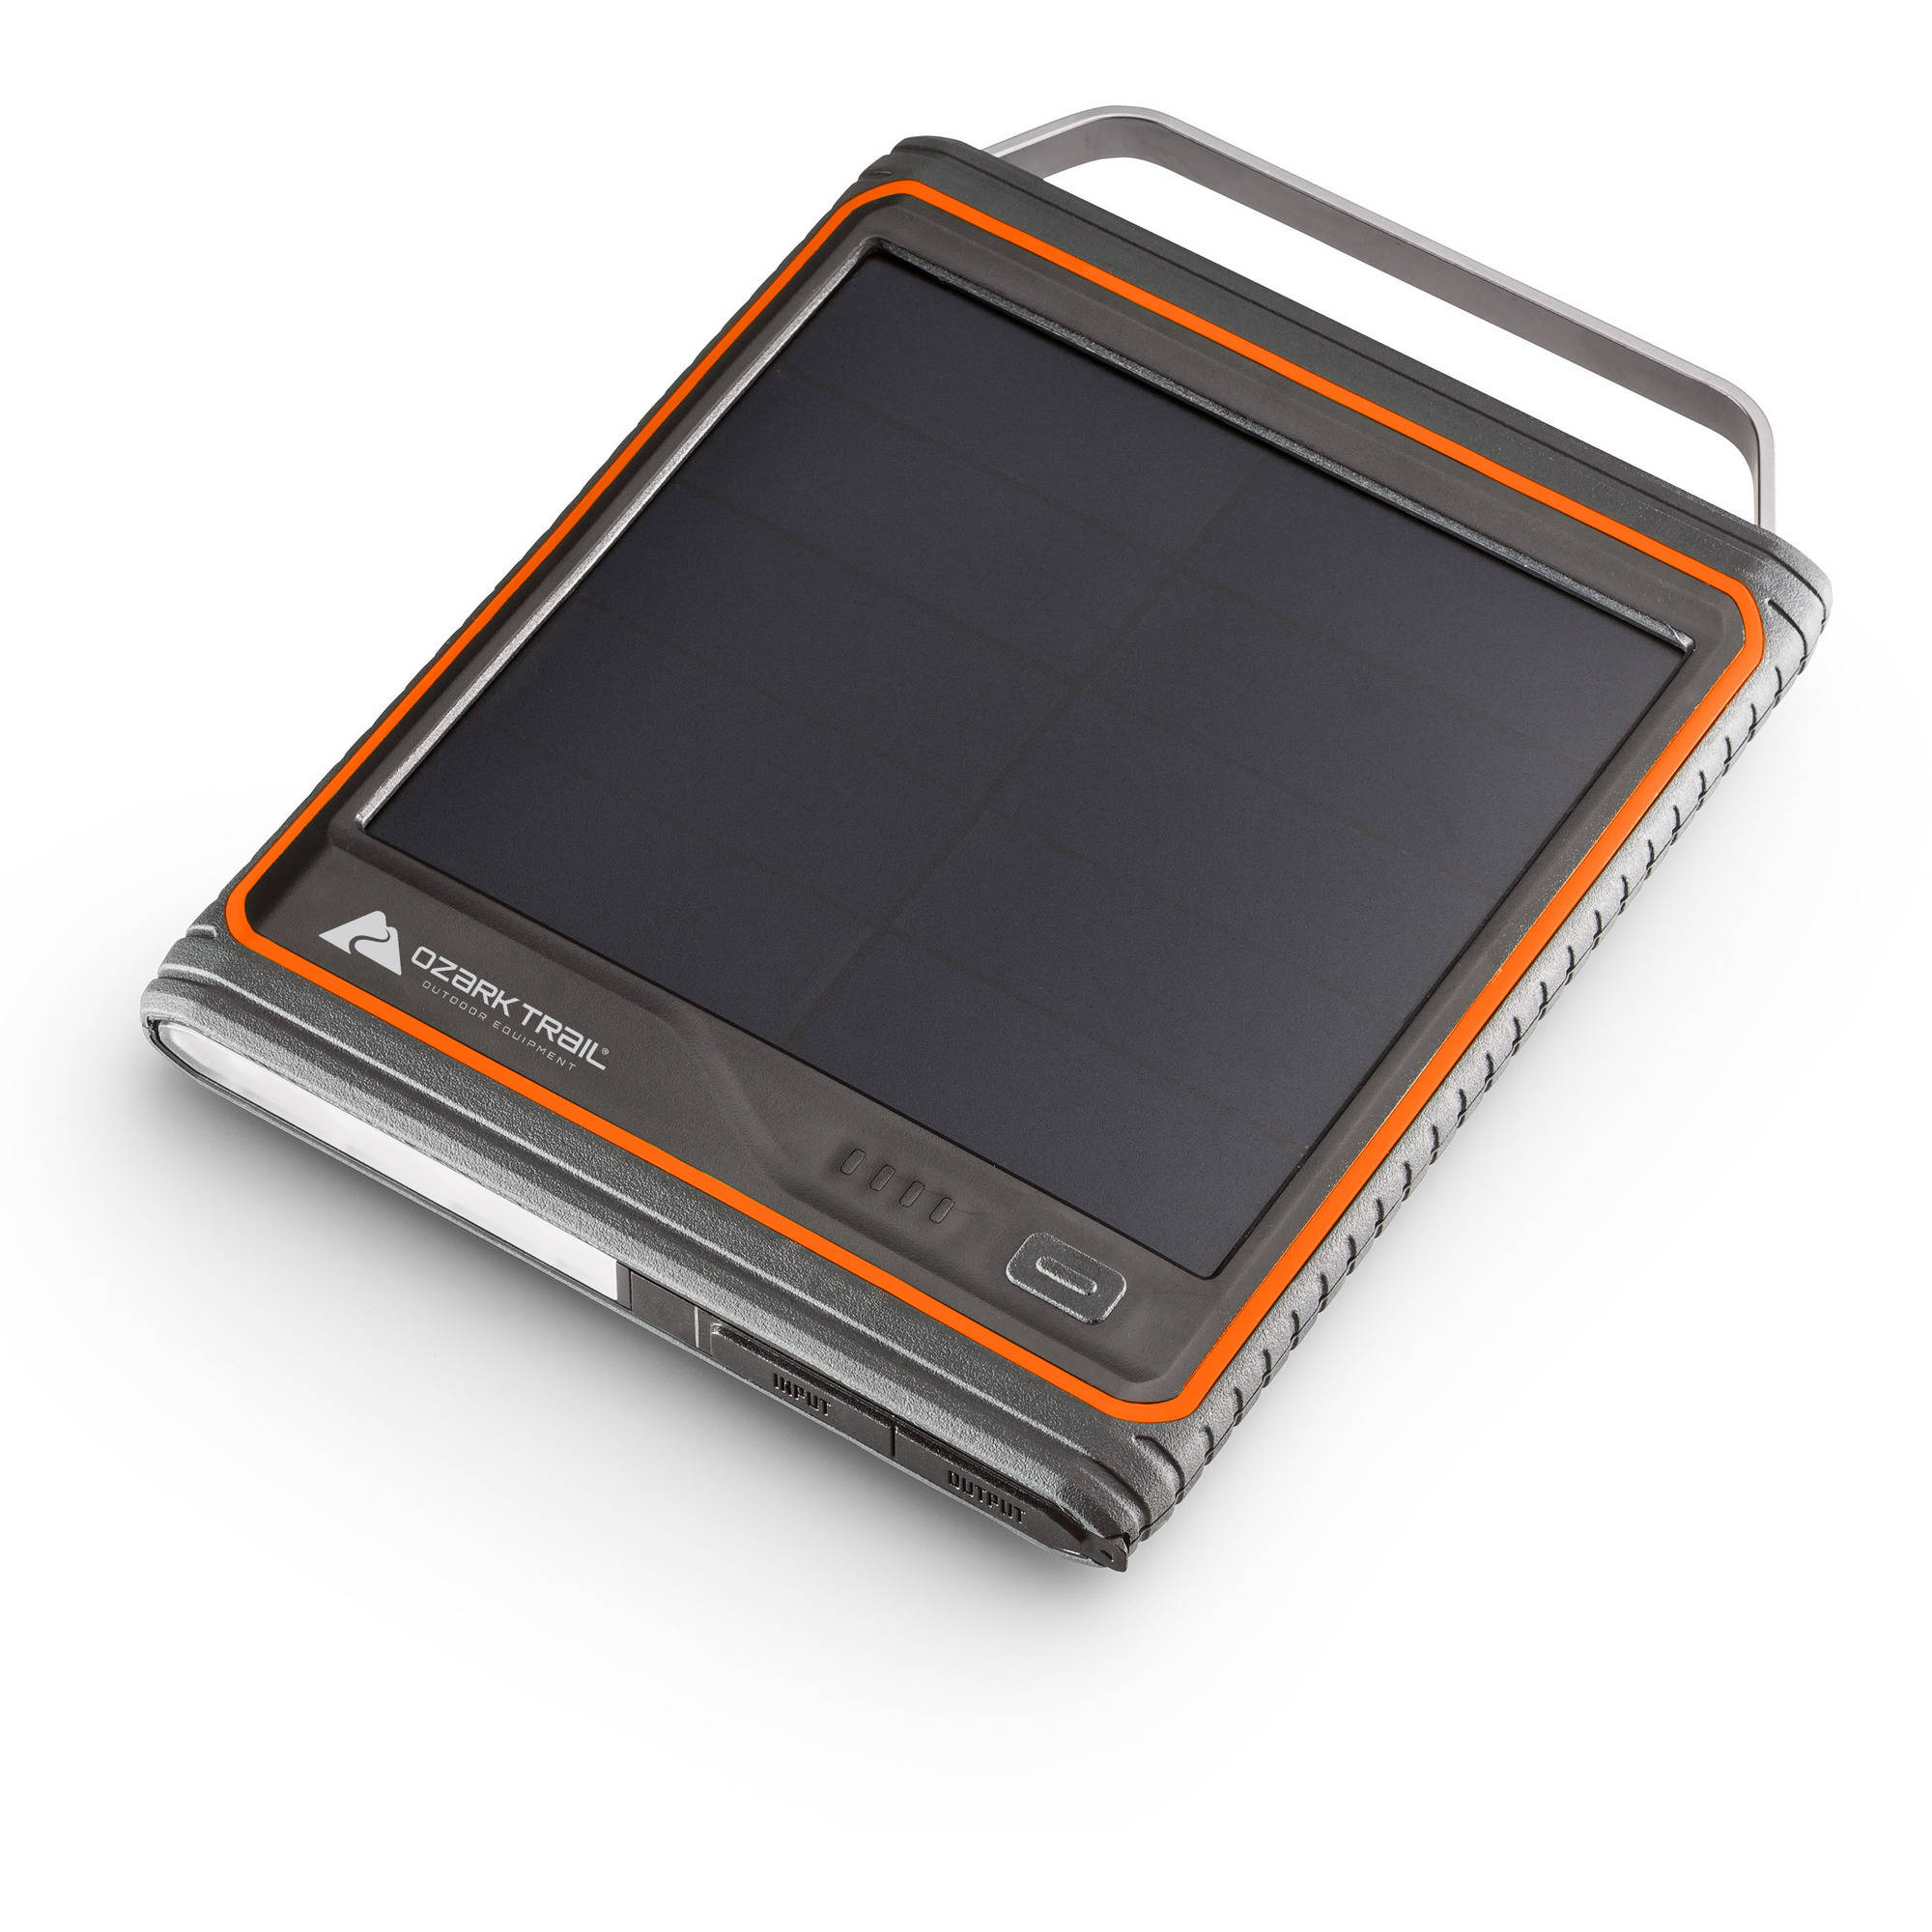 Ozark Trail 2400 Portable Phone Charger with Solar Panel - image 1 of 5